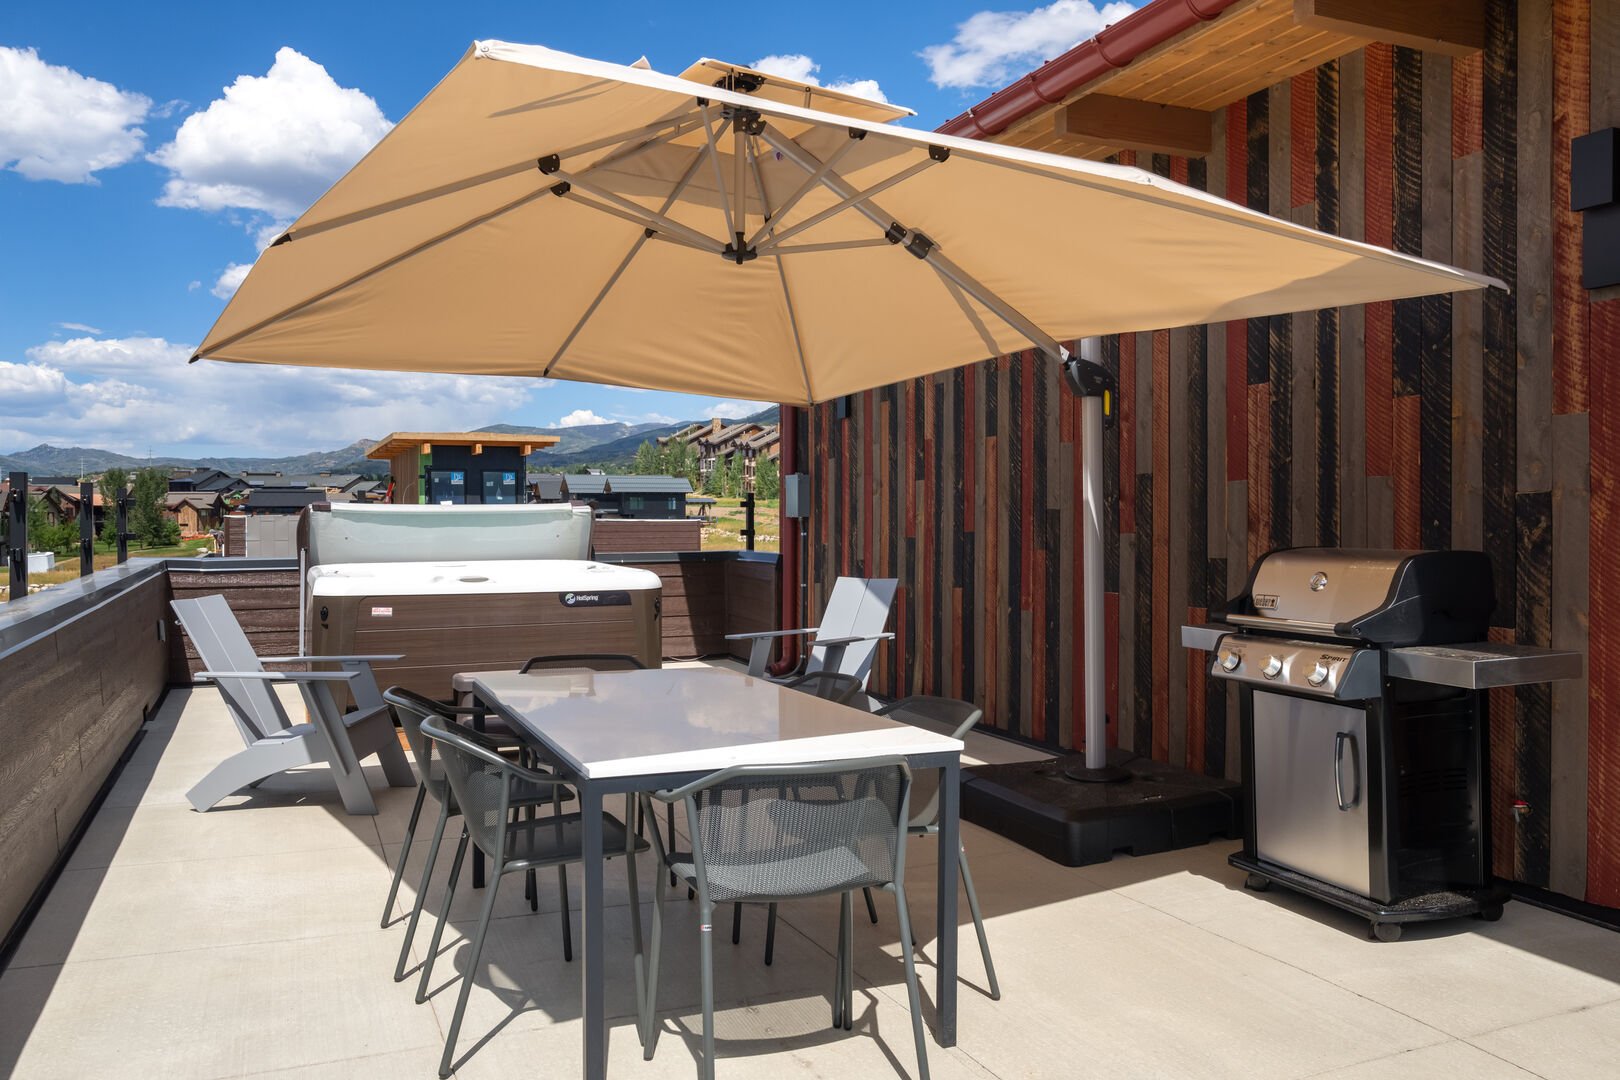 Rooftop Retreat! Complete with rooftop hot tub, shaded dining, fire pit, pet friendly, this property has it all!!